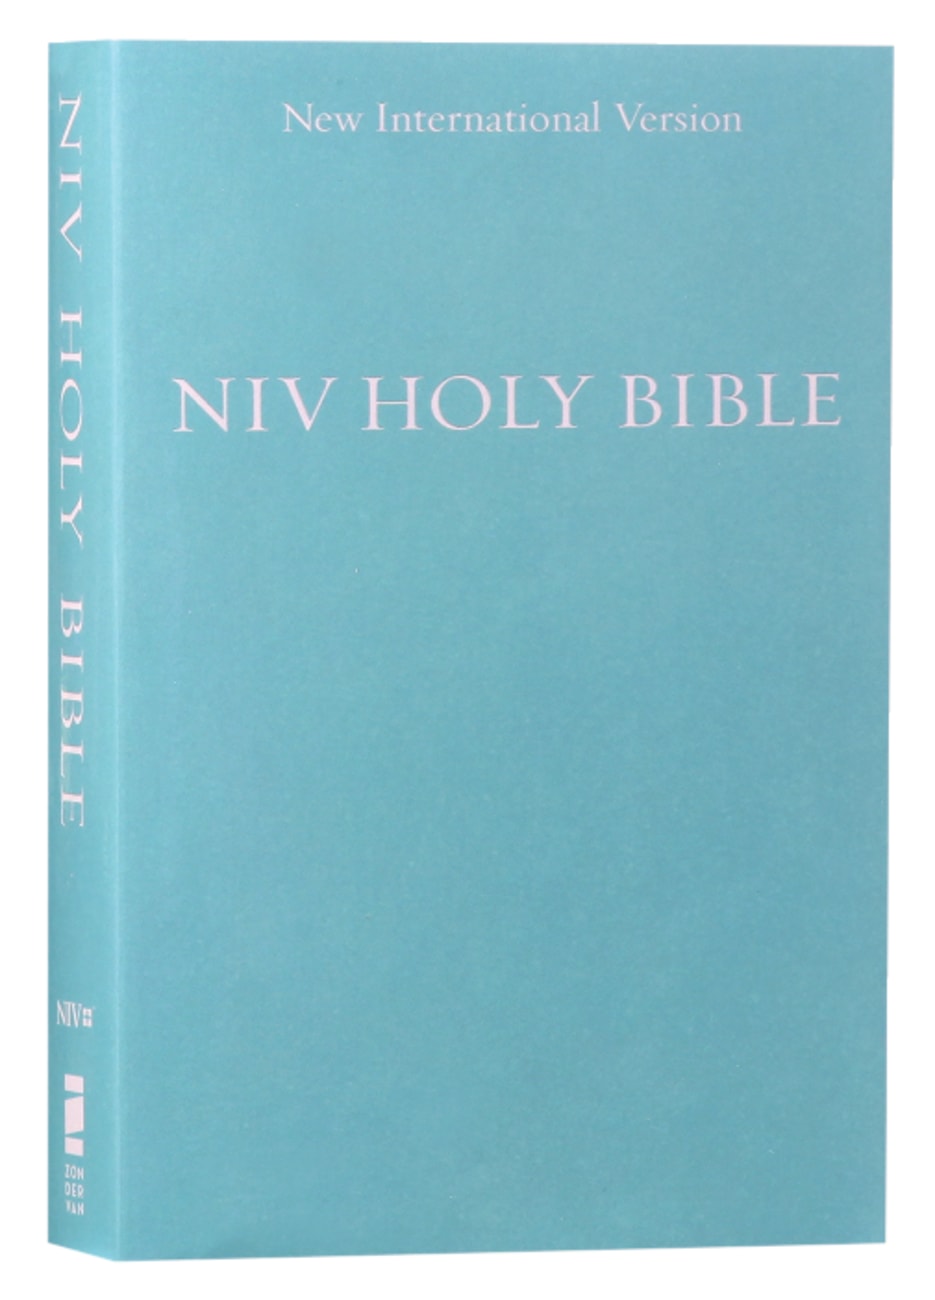 NIV Holy Bible Compact Blue (Black Letter Edition) Paperback